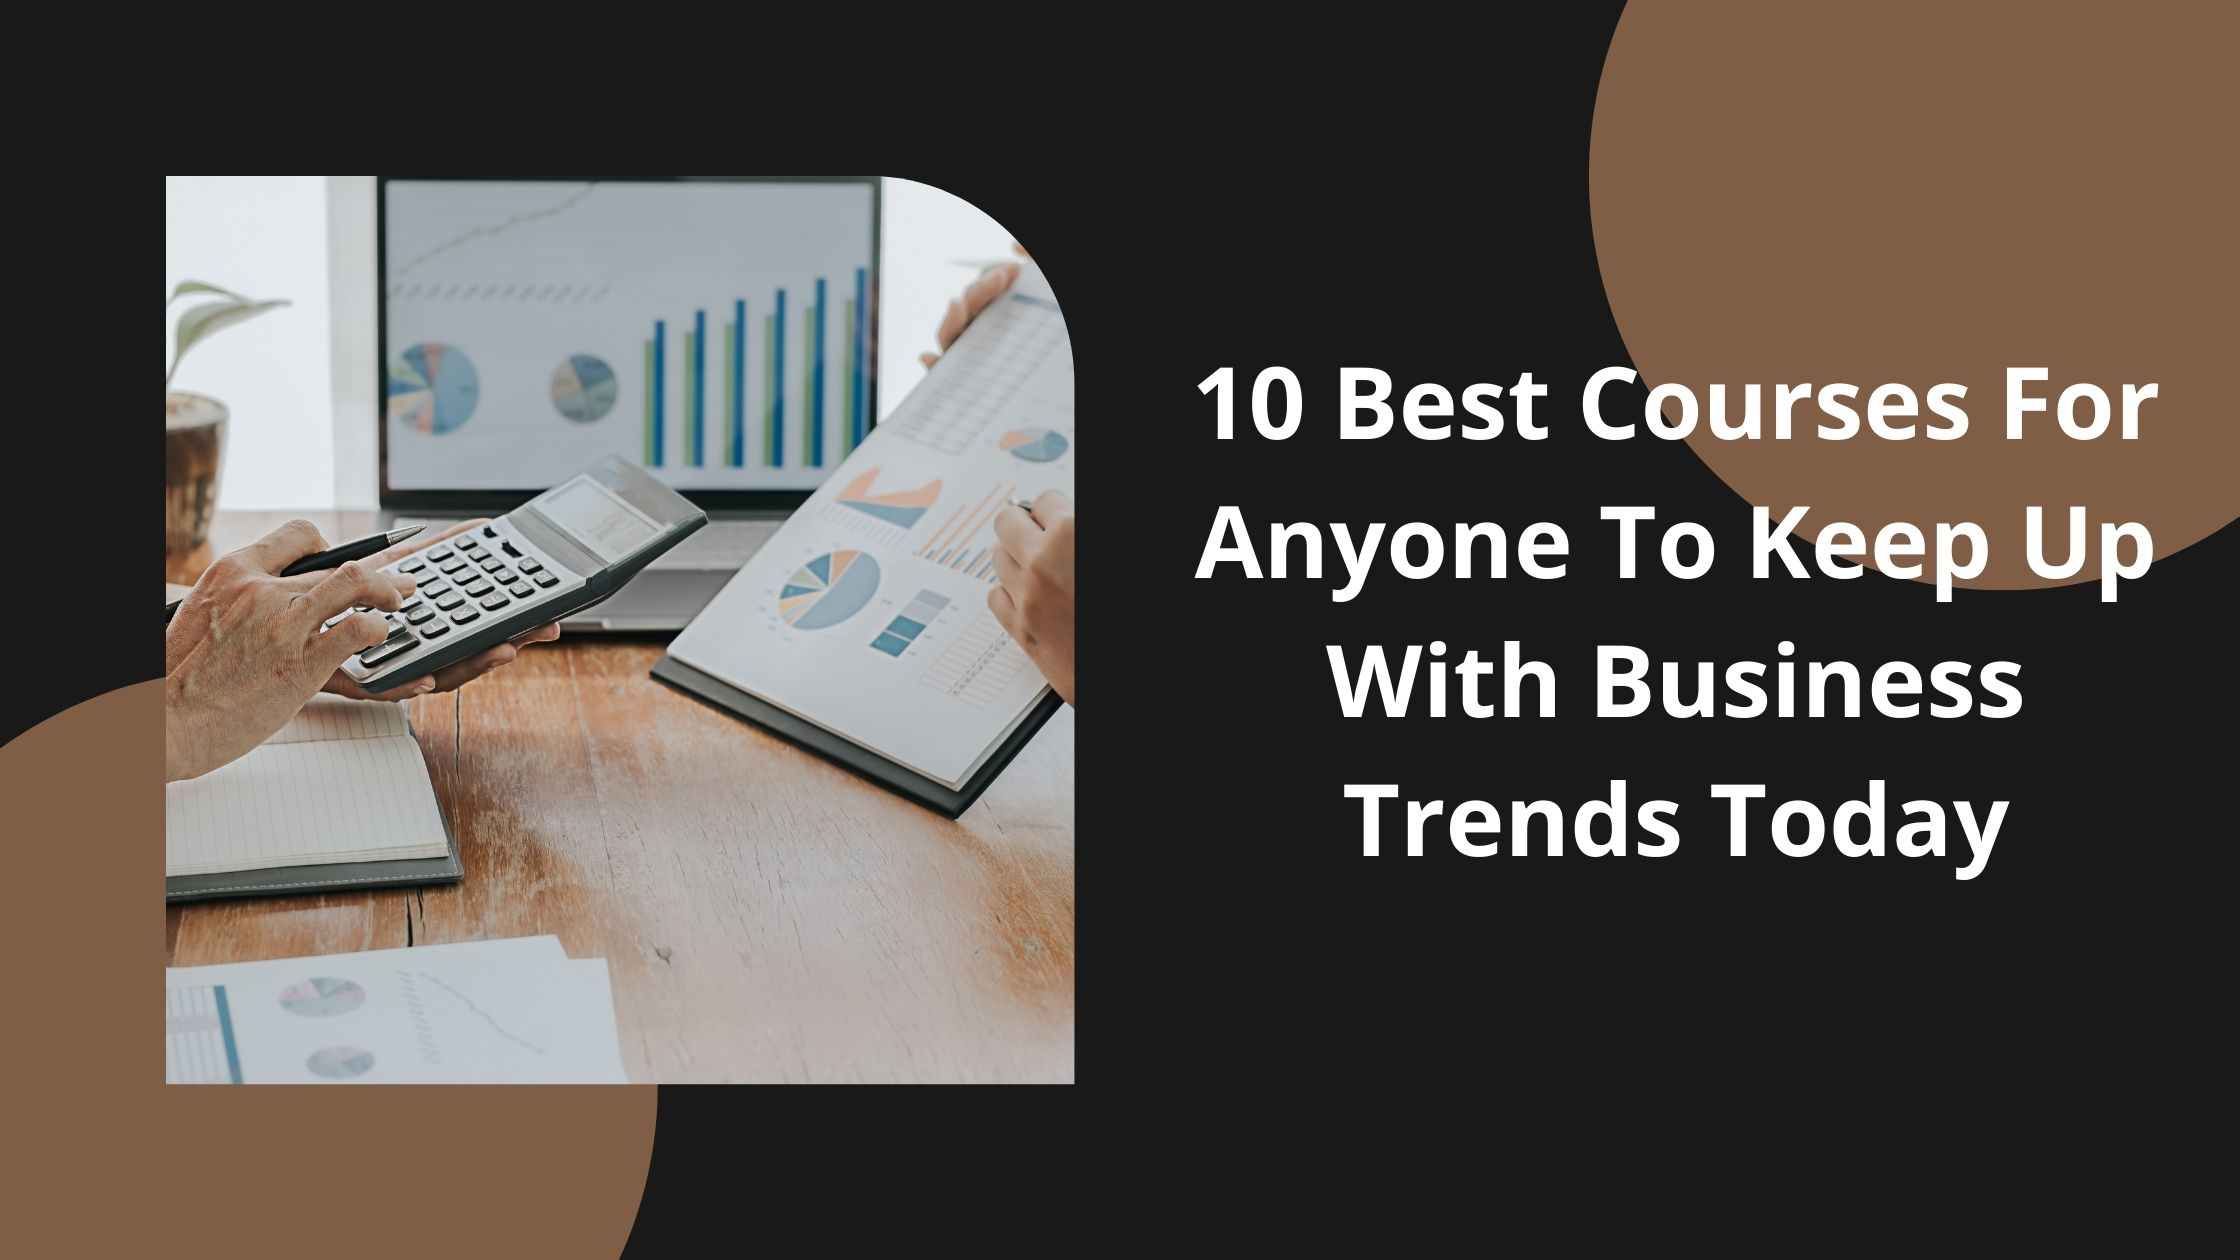 10 Best Courses For Anyone To Keep Up With Business Trends Today